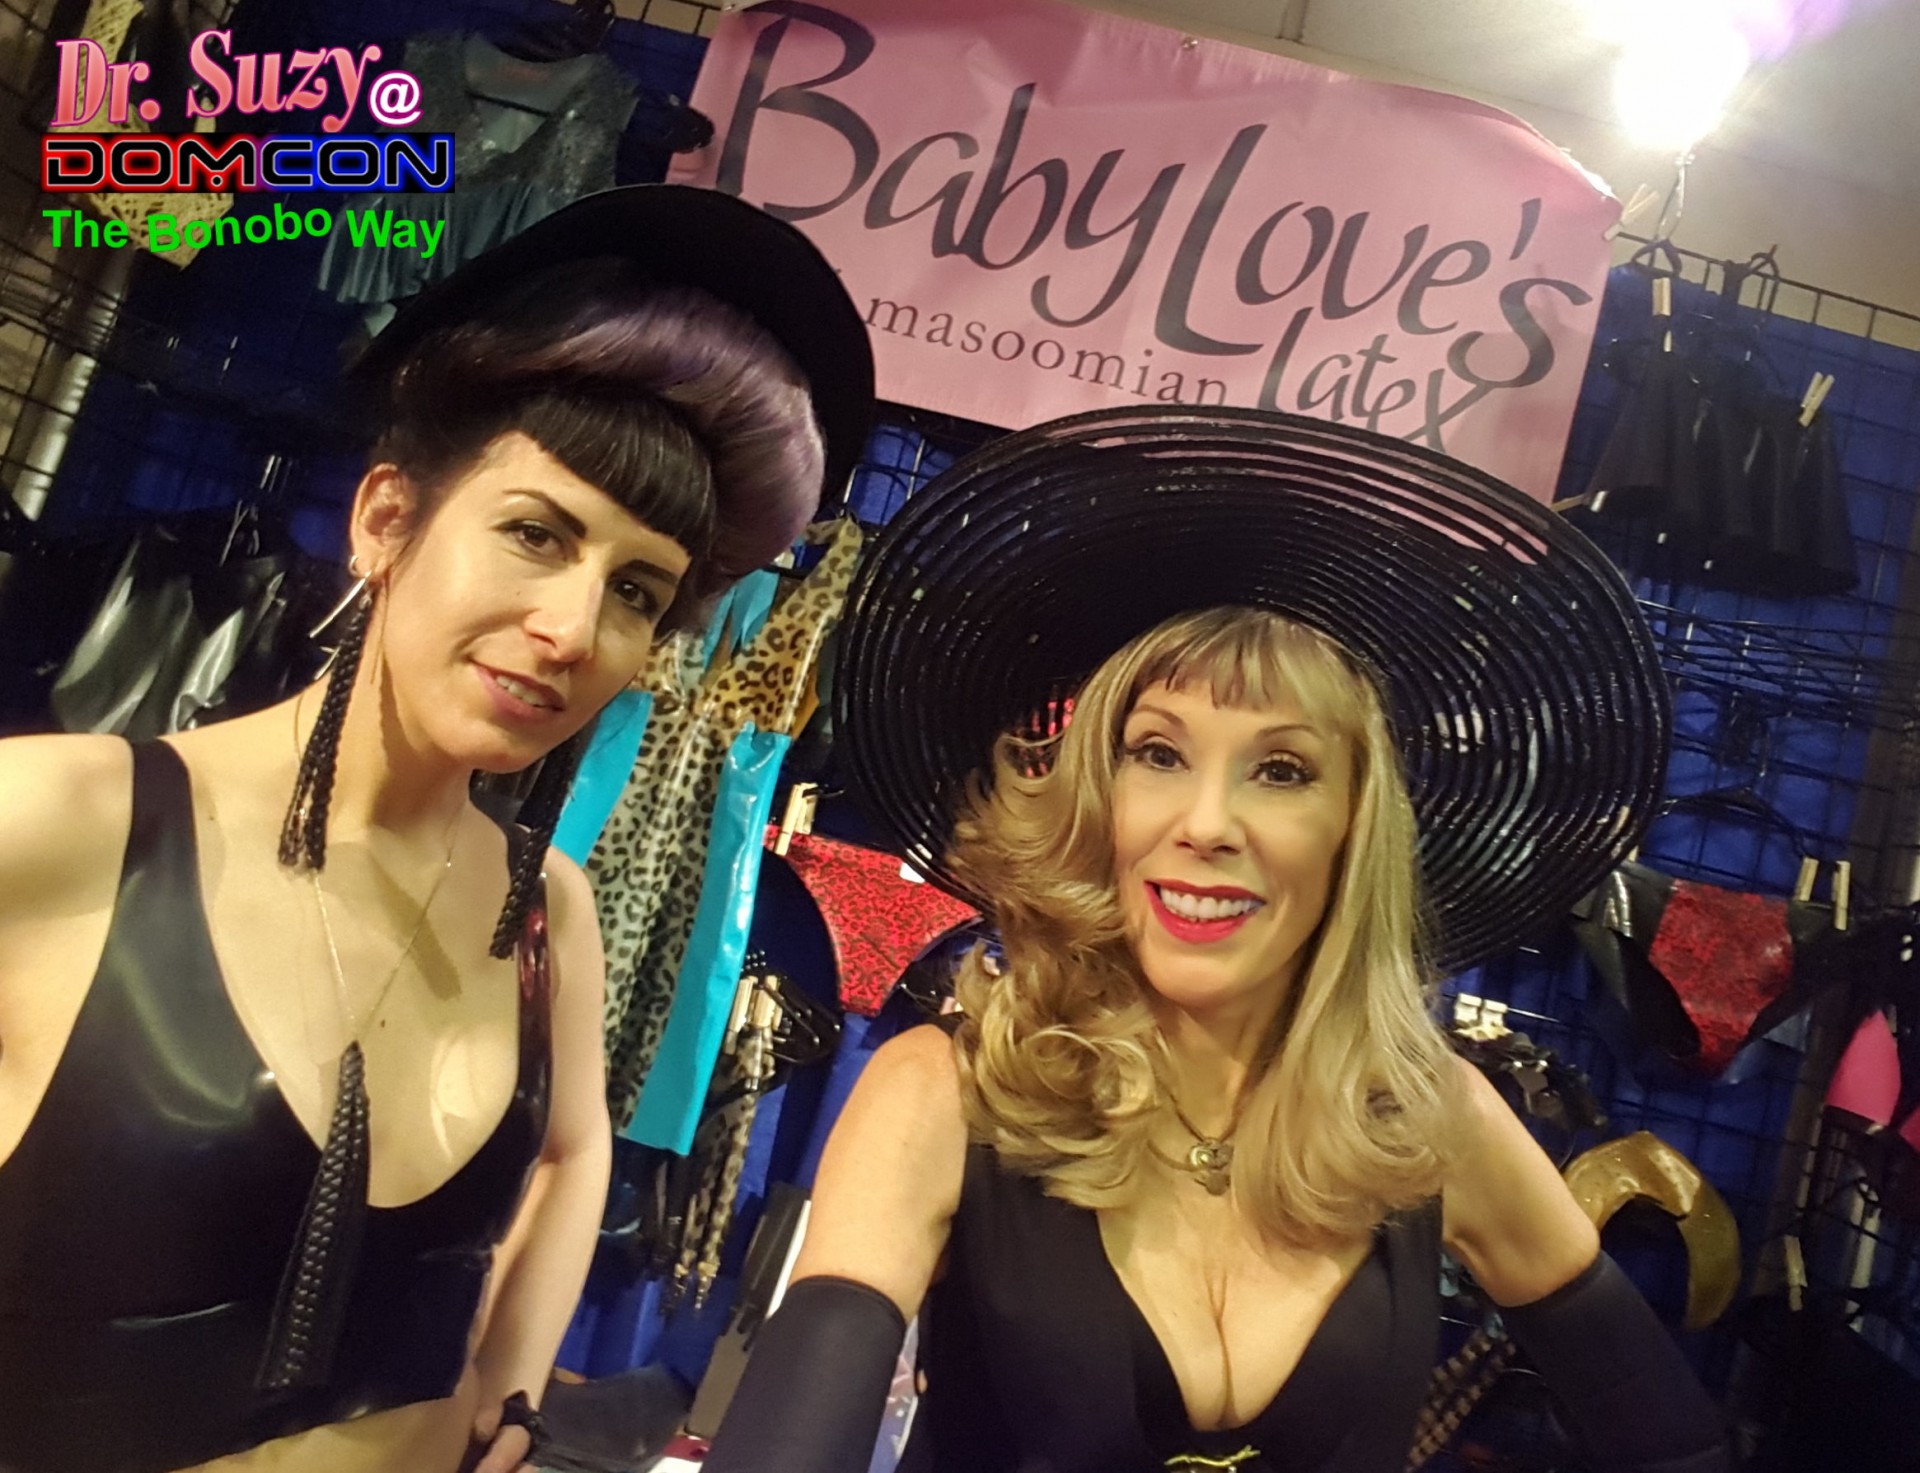 With ReneÃ© Massoumian & my DomCon leopard latex Opening Night dress hanging behind us.